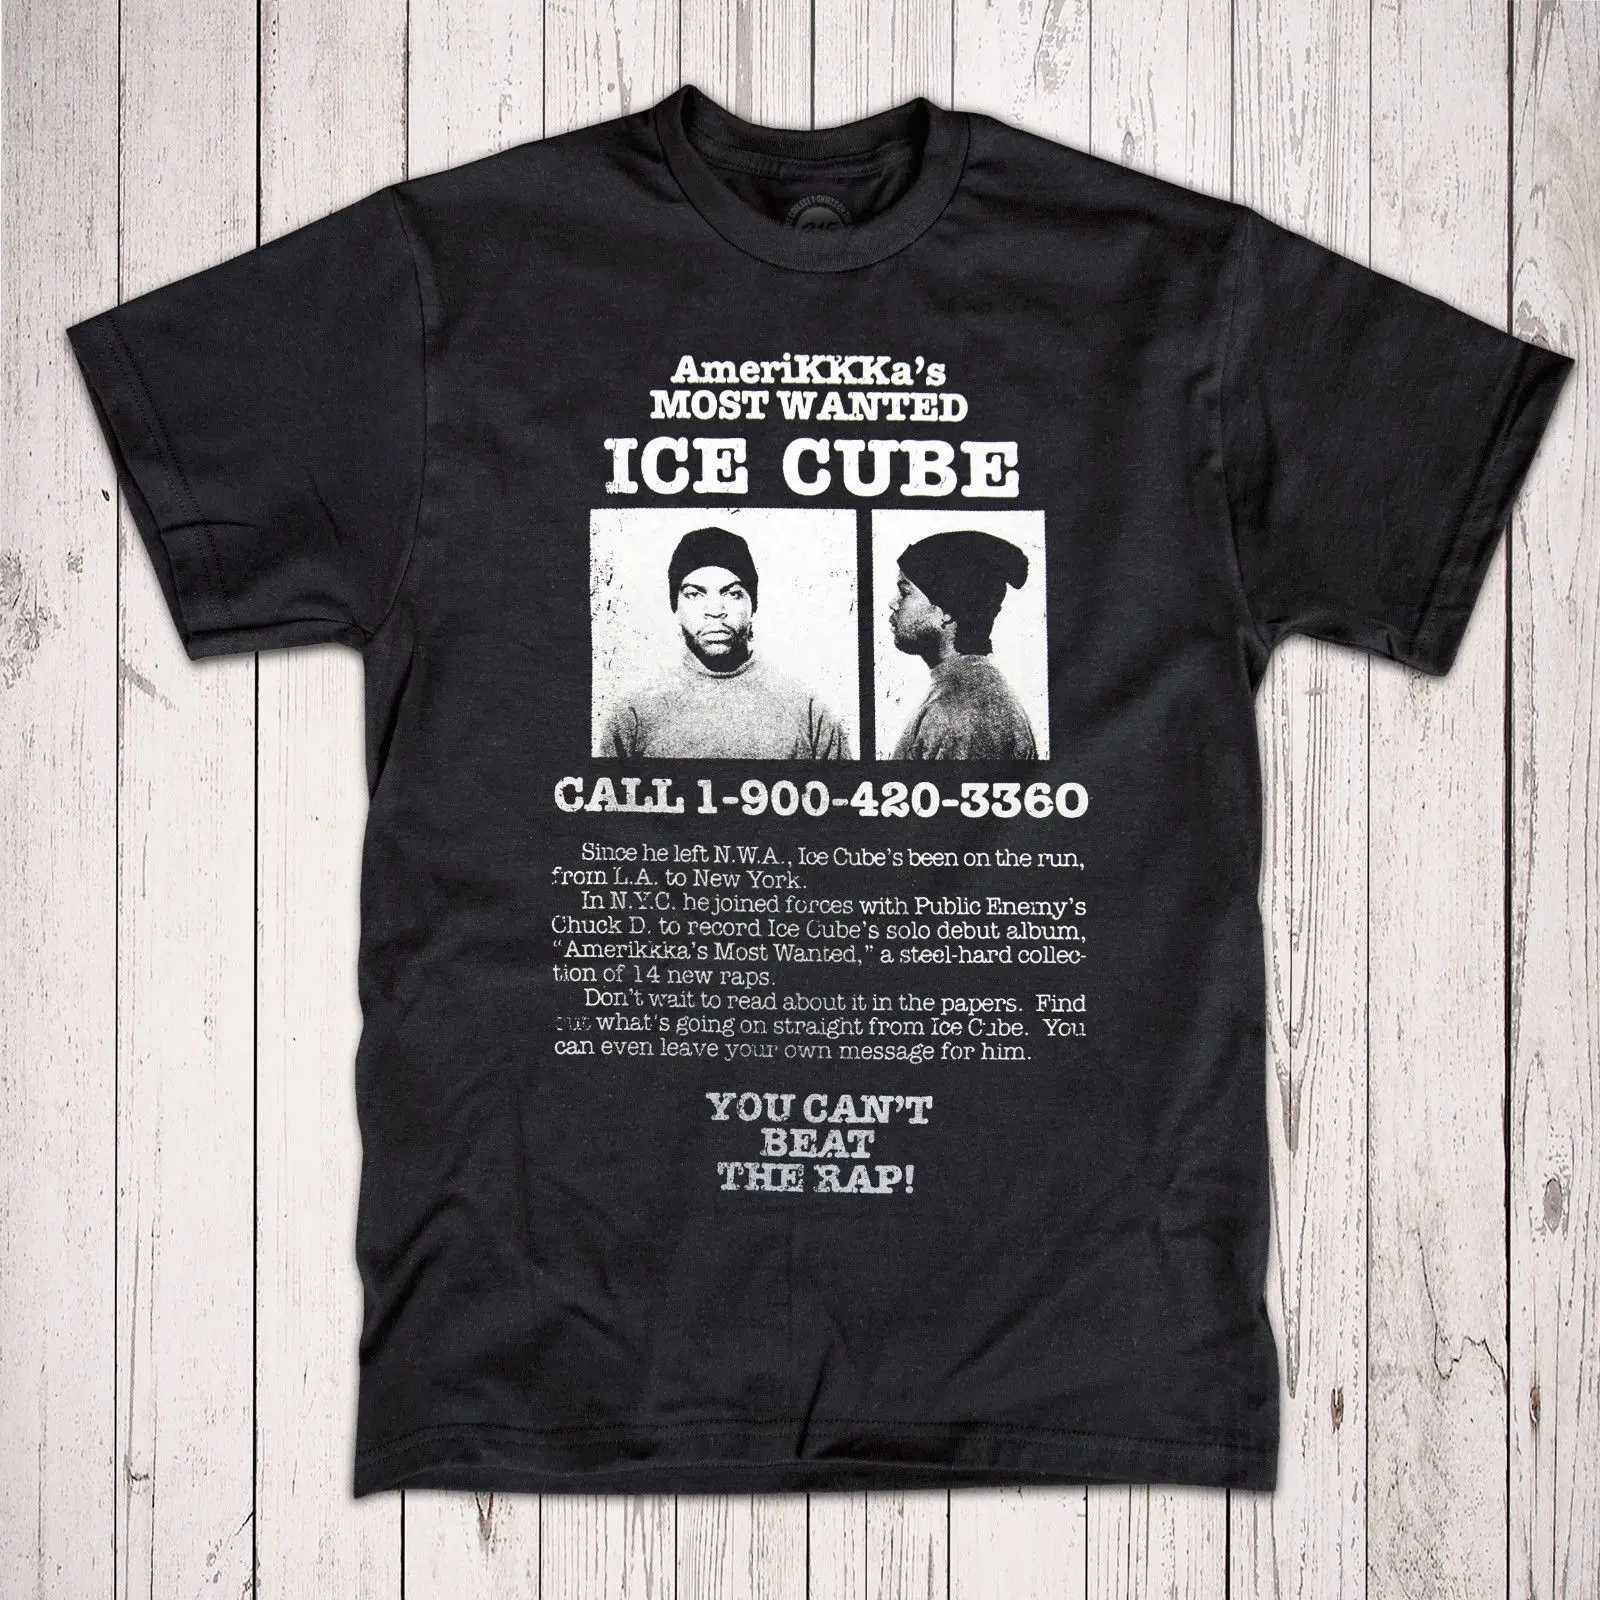 

Ice Cube Wanted Poster T-Shirt Hip Hop Gangsta Rap Legend N.W.A Eazy-E Dre Funny Tops Tee Casual O Neck T Shirt Plus Size